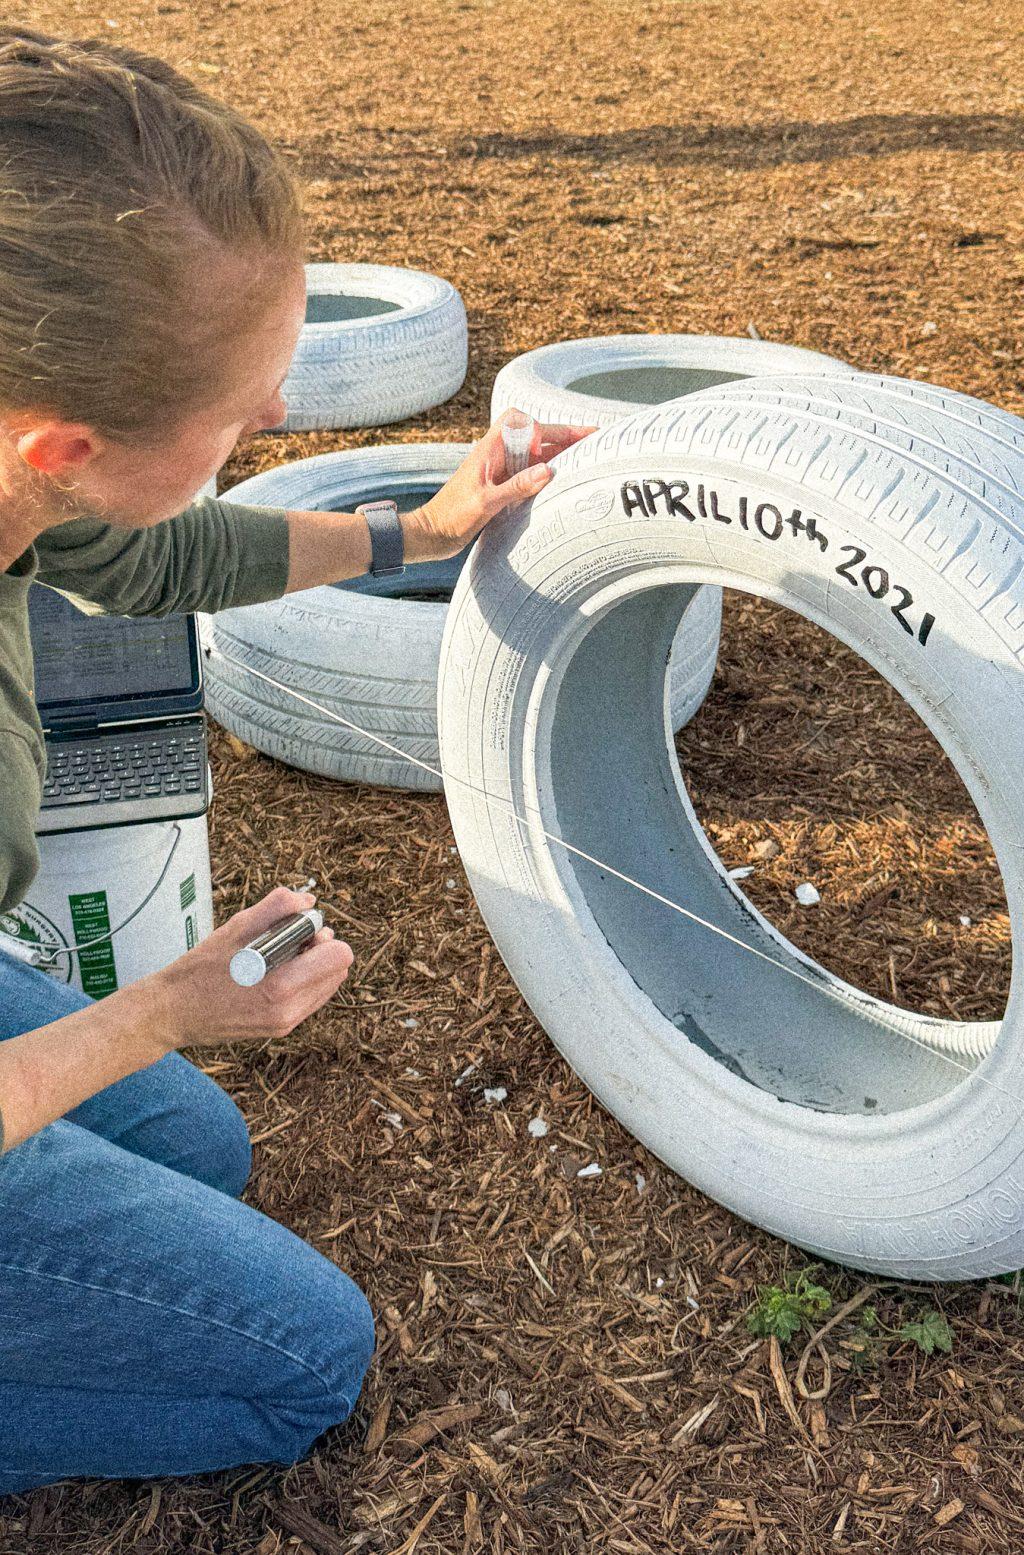 Kylea-Rose Kevitt examines her writing on a ghost tire, Nov. 18. Kylea-Rose's husband Damian Kevitt almost died in 2013, when he was hit by a car while cycling in Griffith Park.